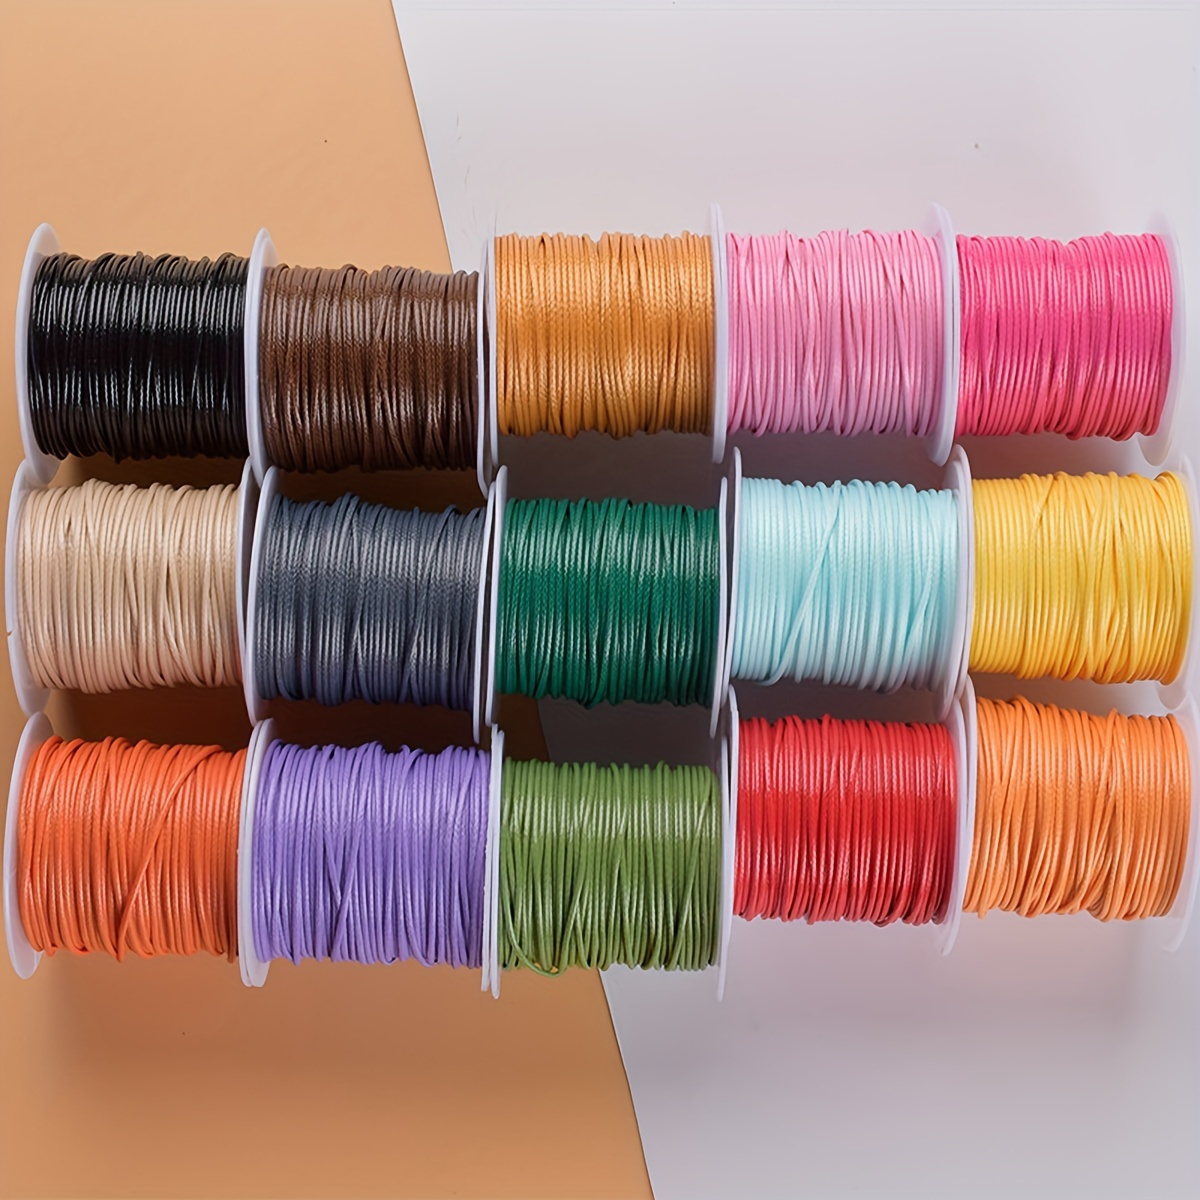 

10pcs Random Colors, 1mm Waxed Cord, 100m Each, Diy Jewelry Making Supplies, For Bracelets, Necklaces, Phone Charms